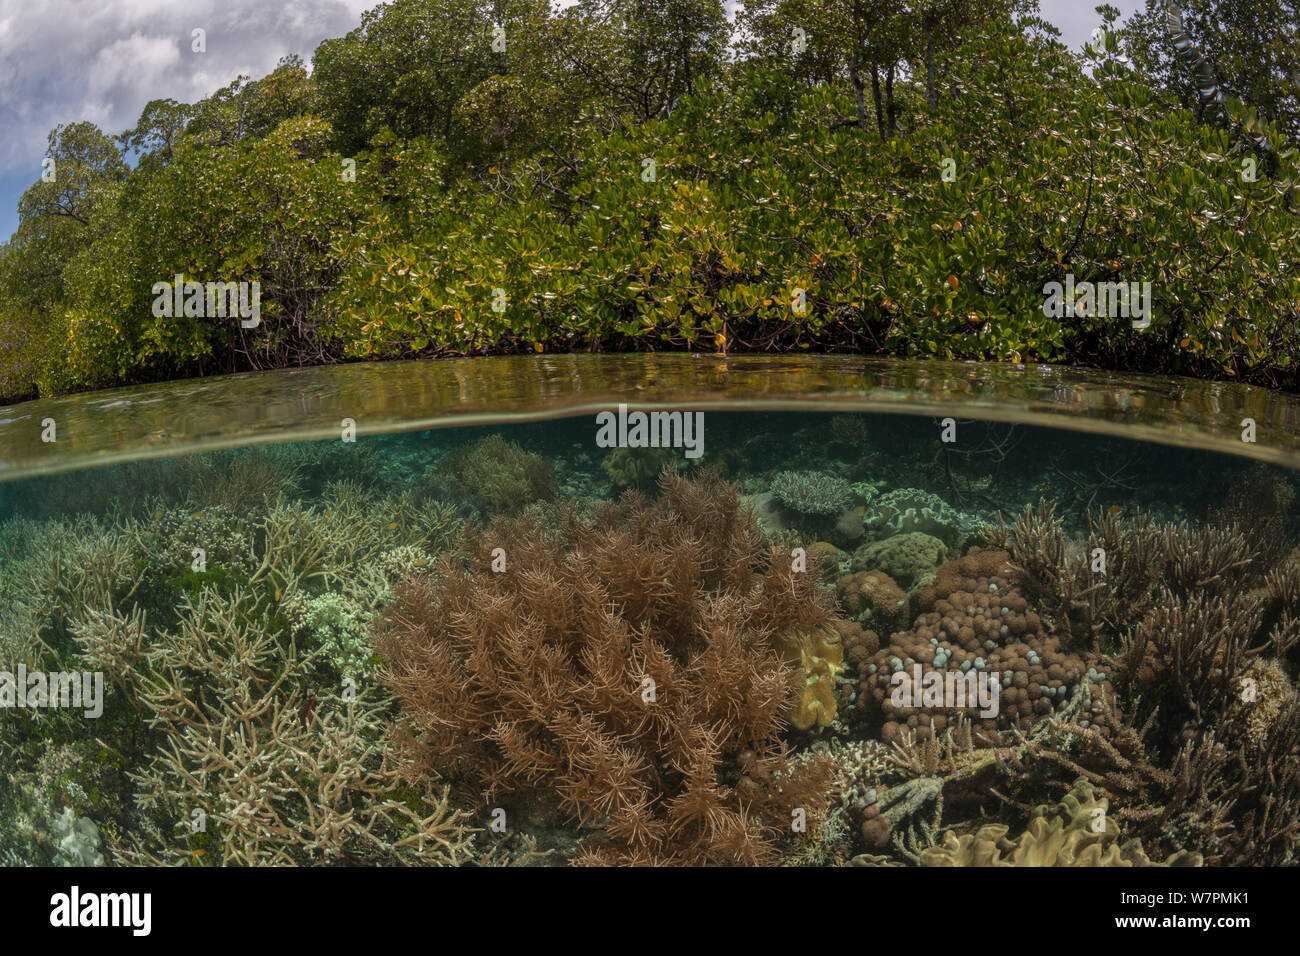 Coral reef split level with mangroves. Raja Ampat, West Papua, Indonesia Stock Photo